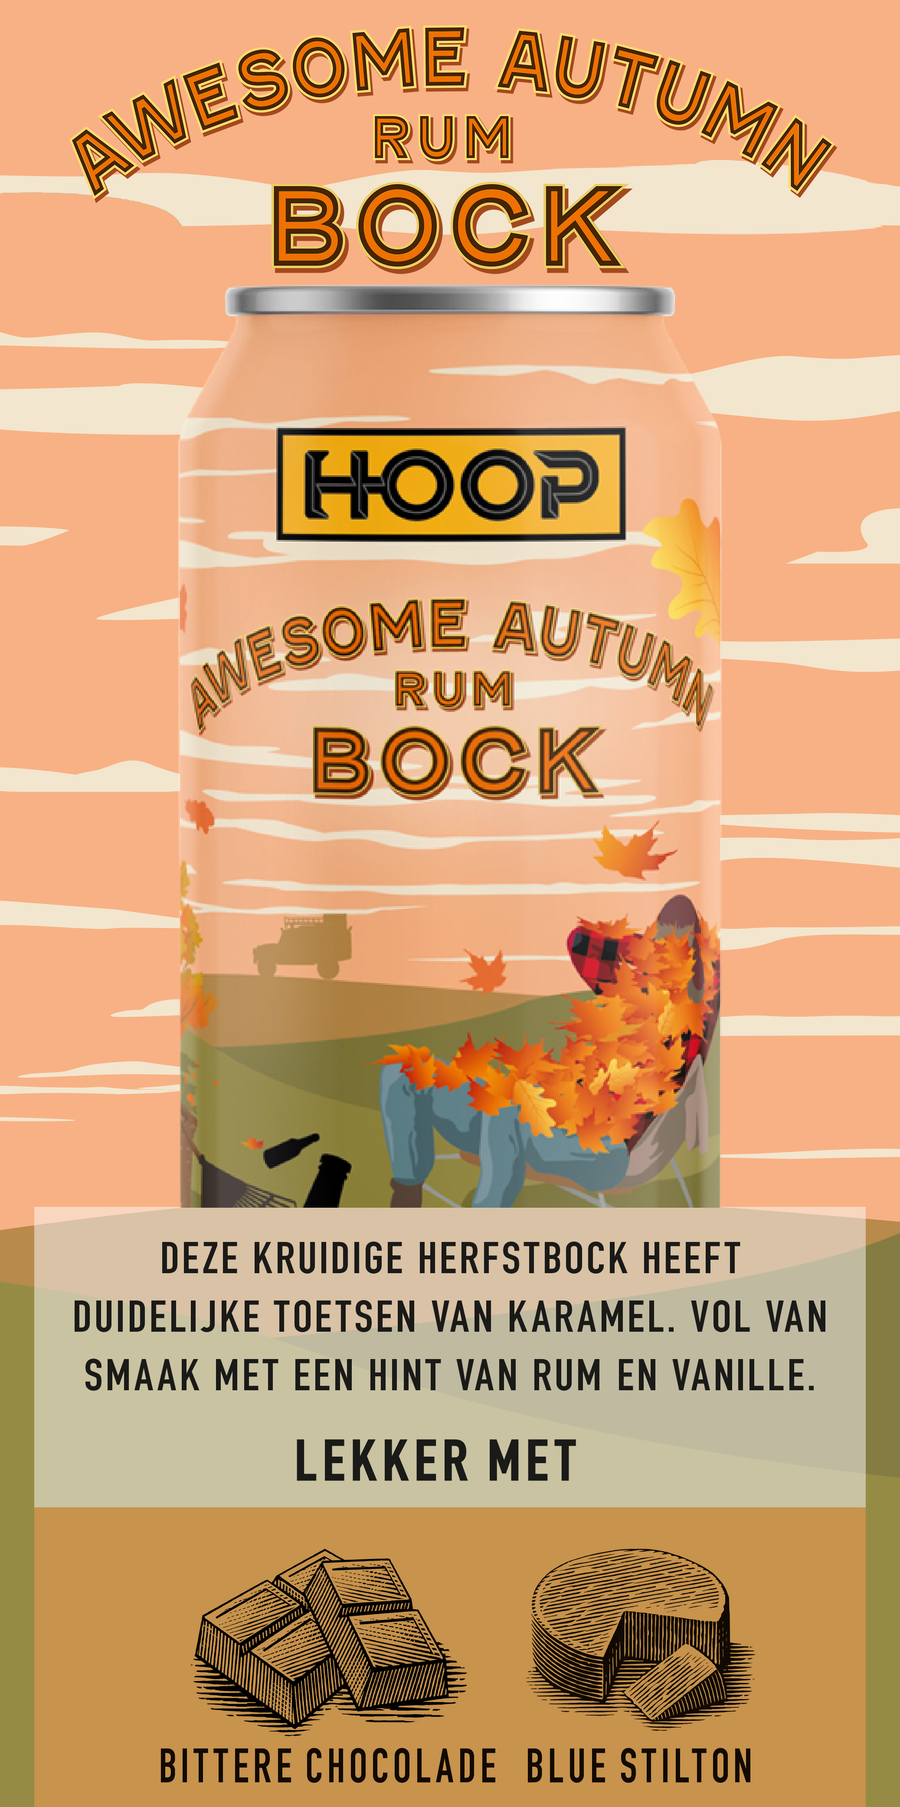 Awesome Autumn Rumbock CAN